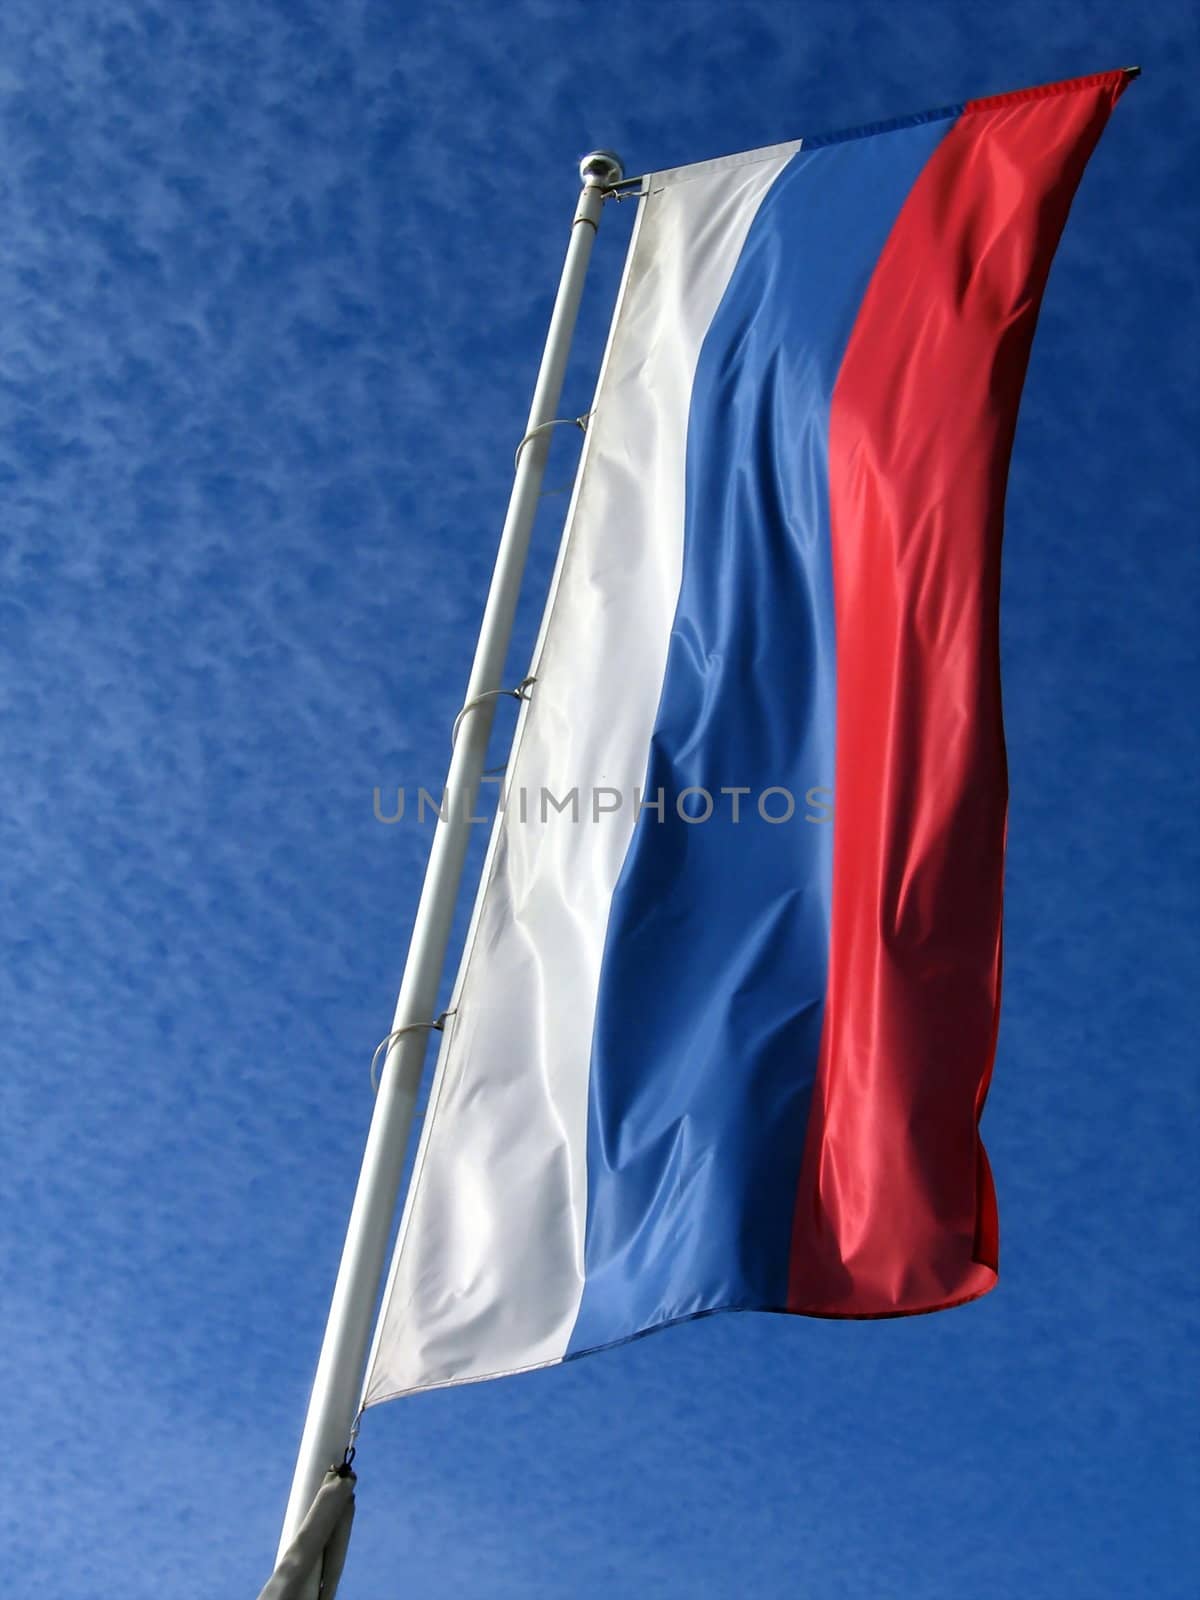 National Russian flag on a background of blue sky